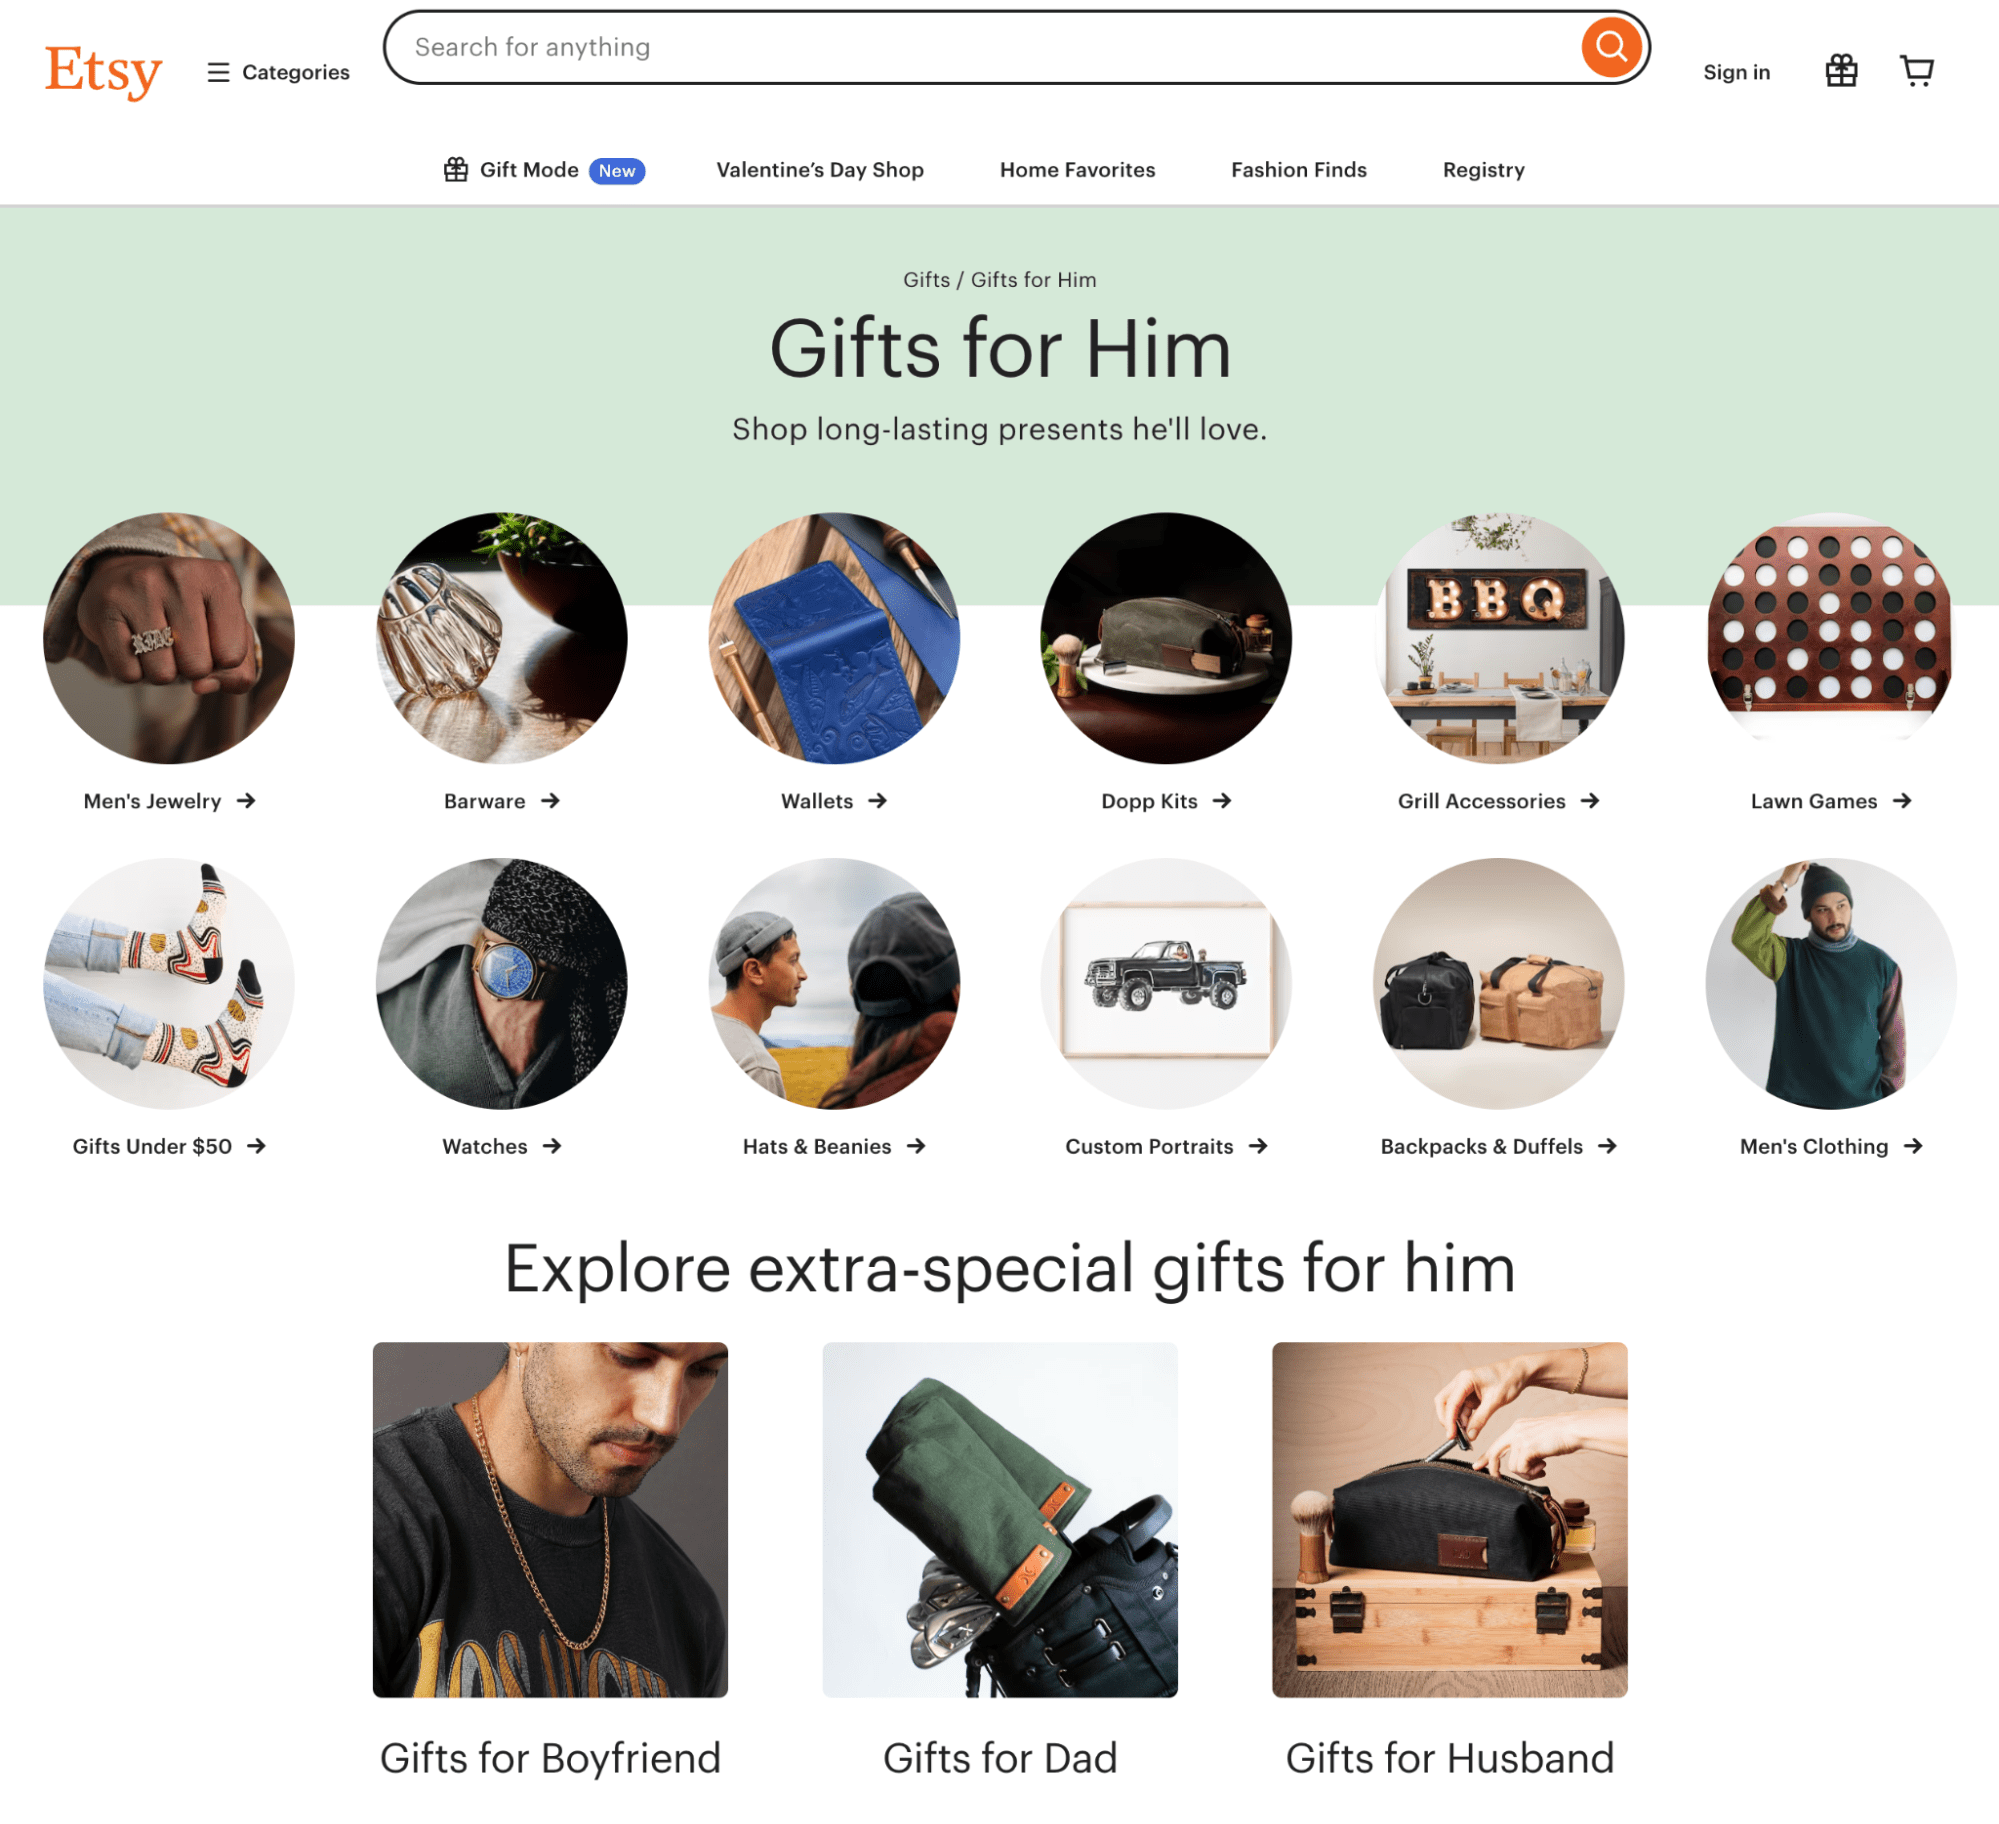 Etsy curates collections for shoppers to make finding products easier.